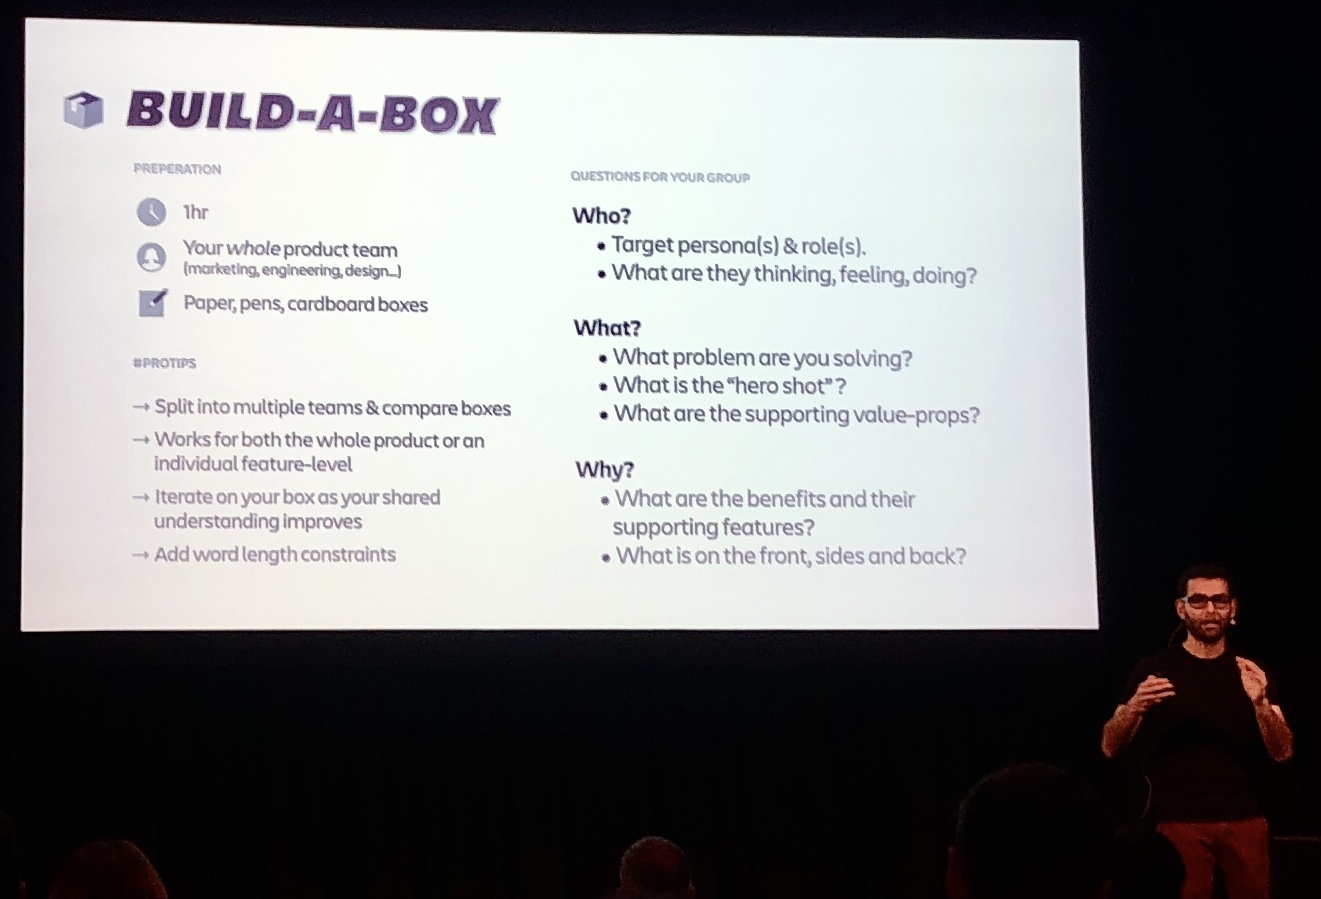 More on Build-a-box